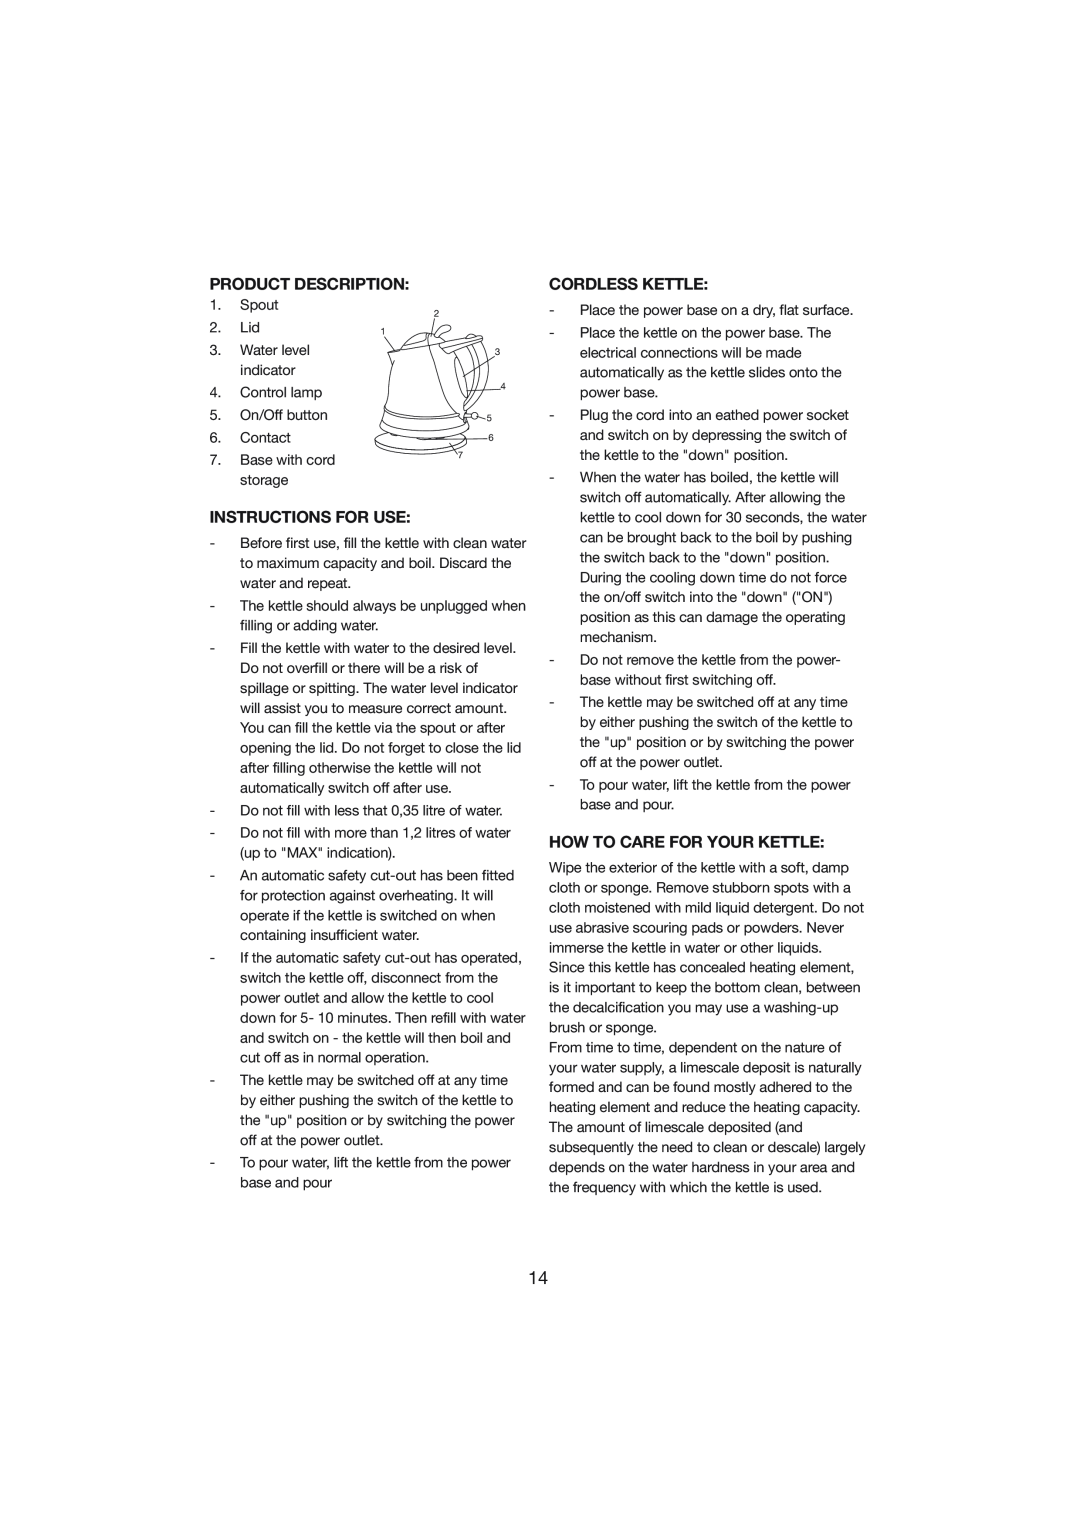 Melissa 245-014 manual Product Description, Instructions For Use, Cordless Kettle, How To Care For Your Kettle 